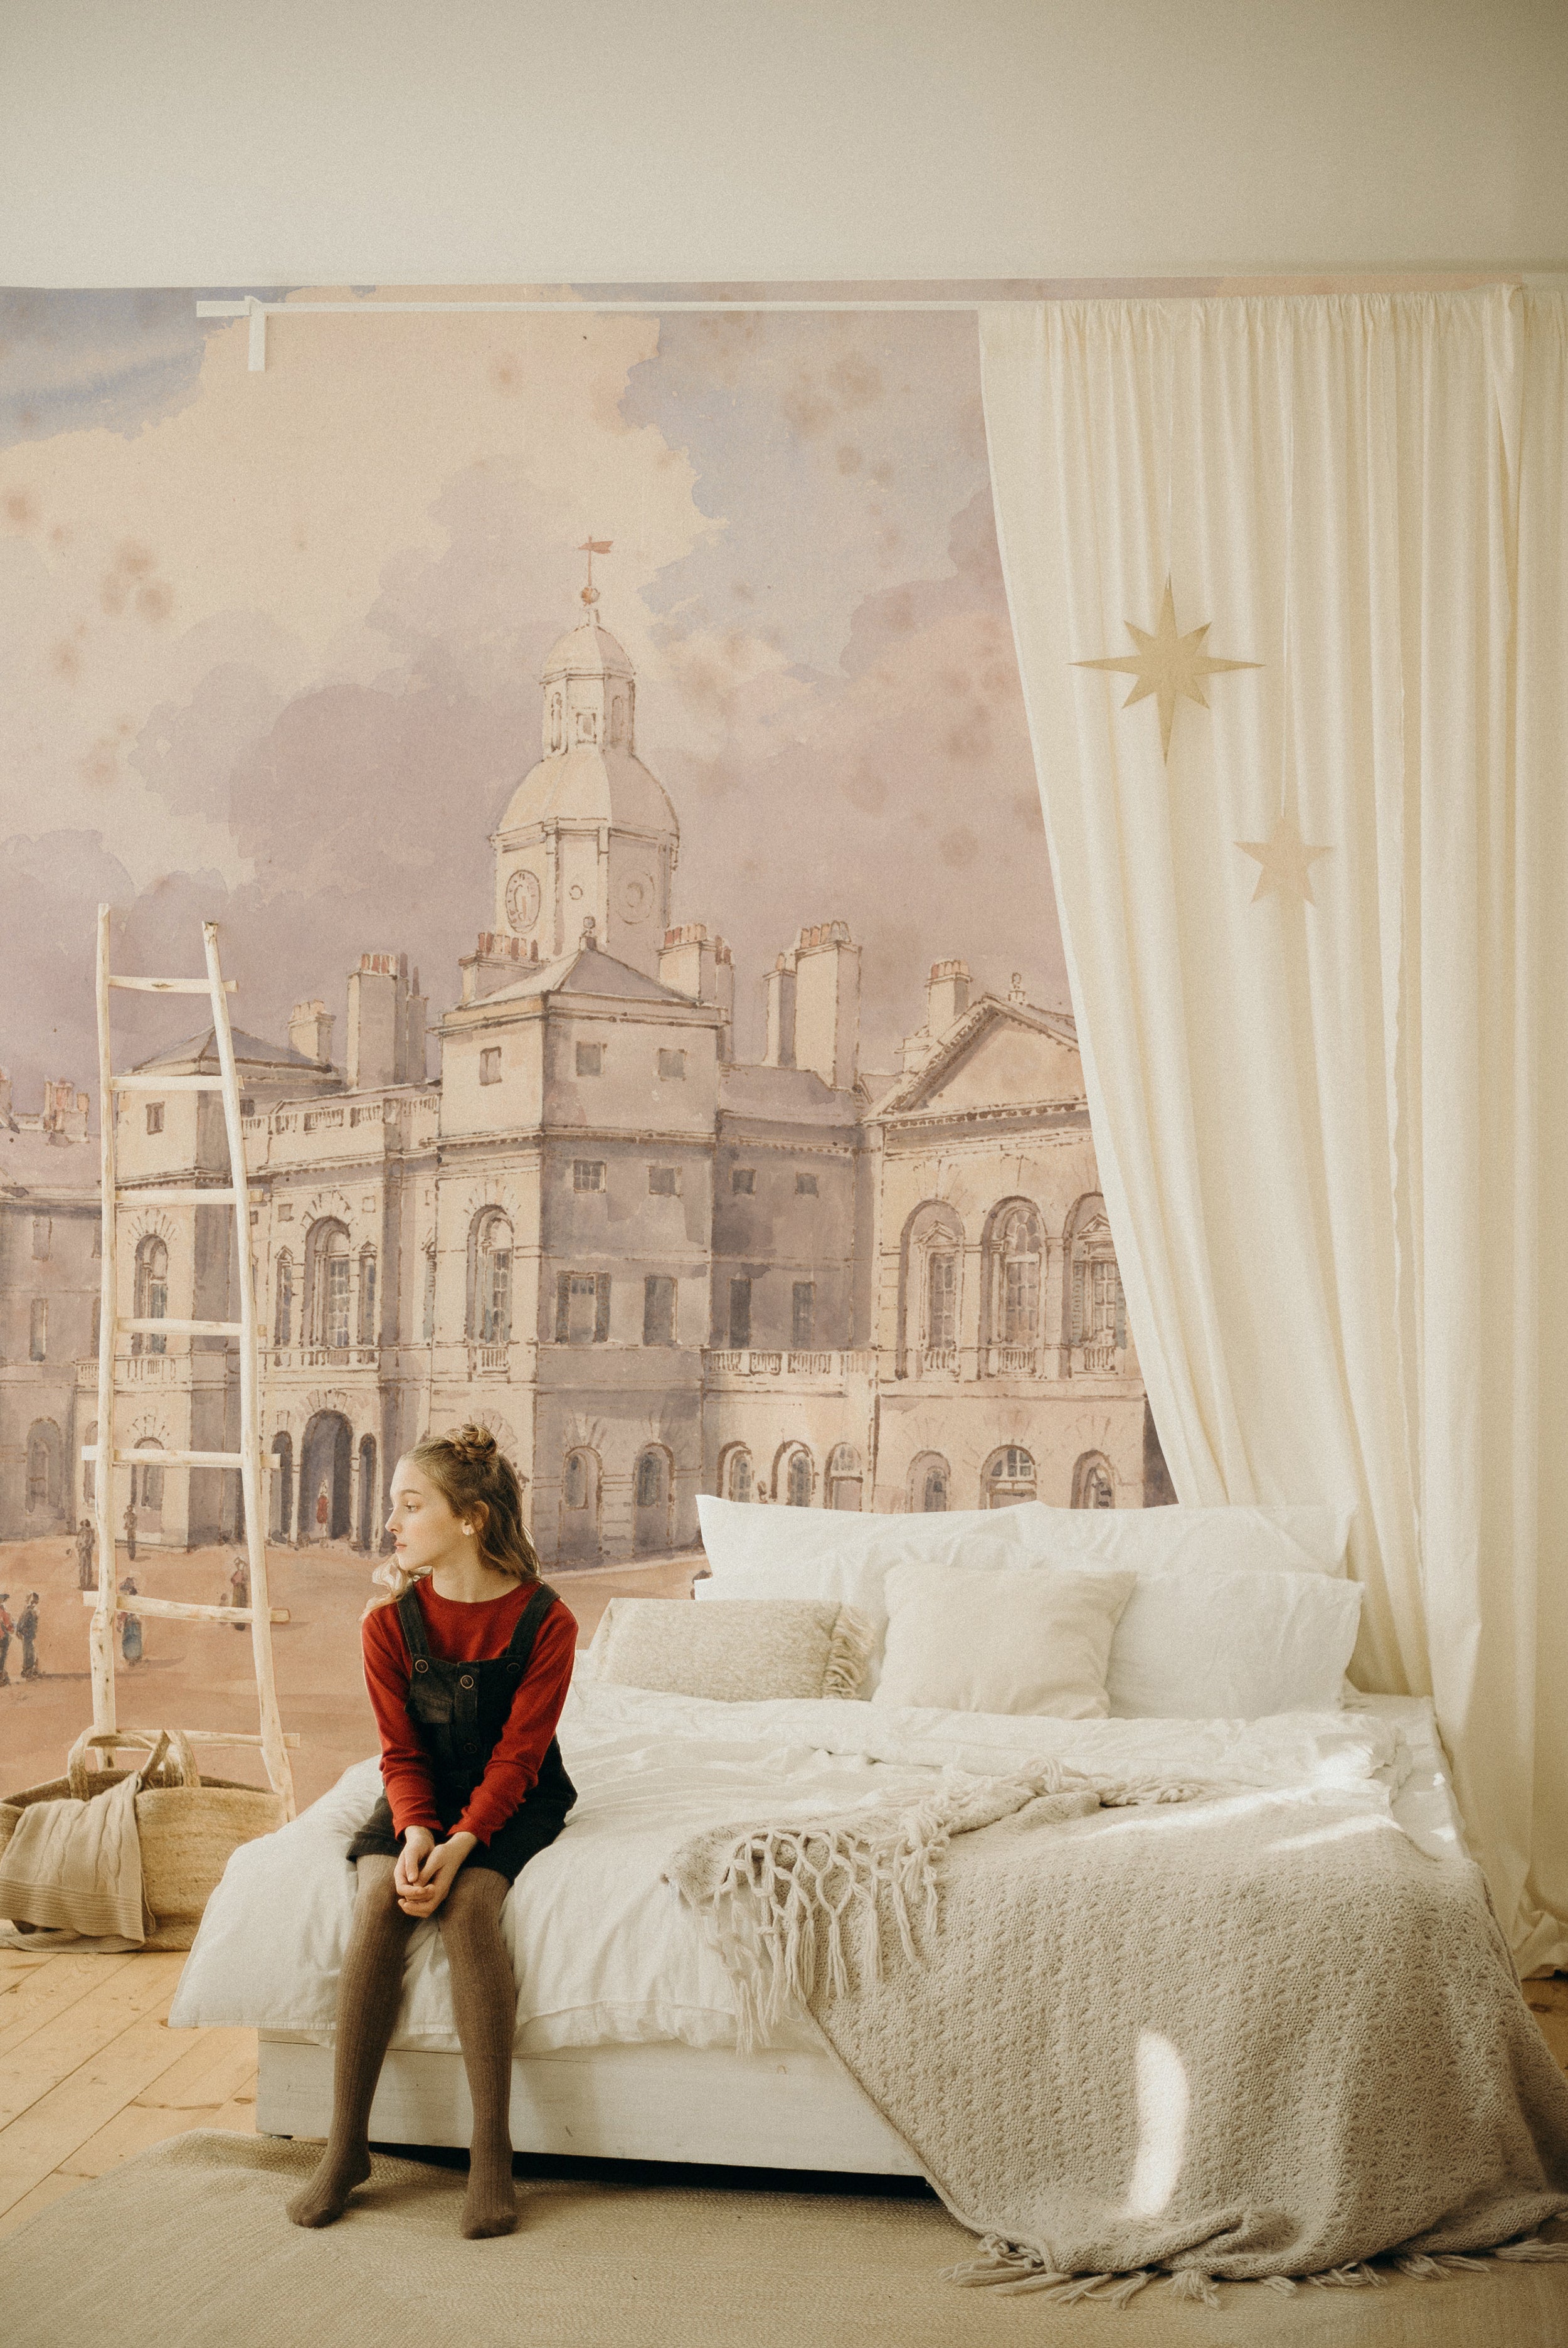 A child's bedroom with a whimsical touch, featuring the "Parade" wallpaper mural as a backdrop. The mural's historic cityscape is paired with simple, cozy bedding and a star-adorned curtain, creating a dreamy atmosphere.